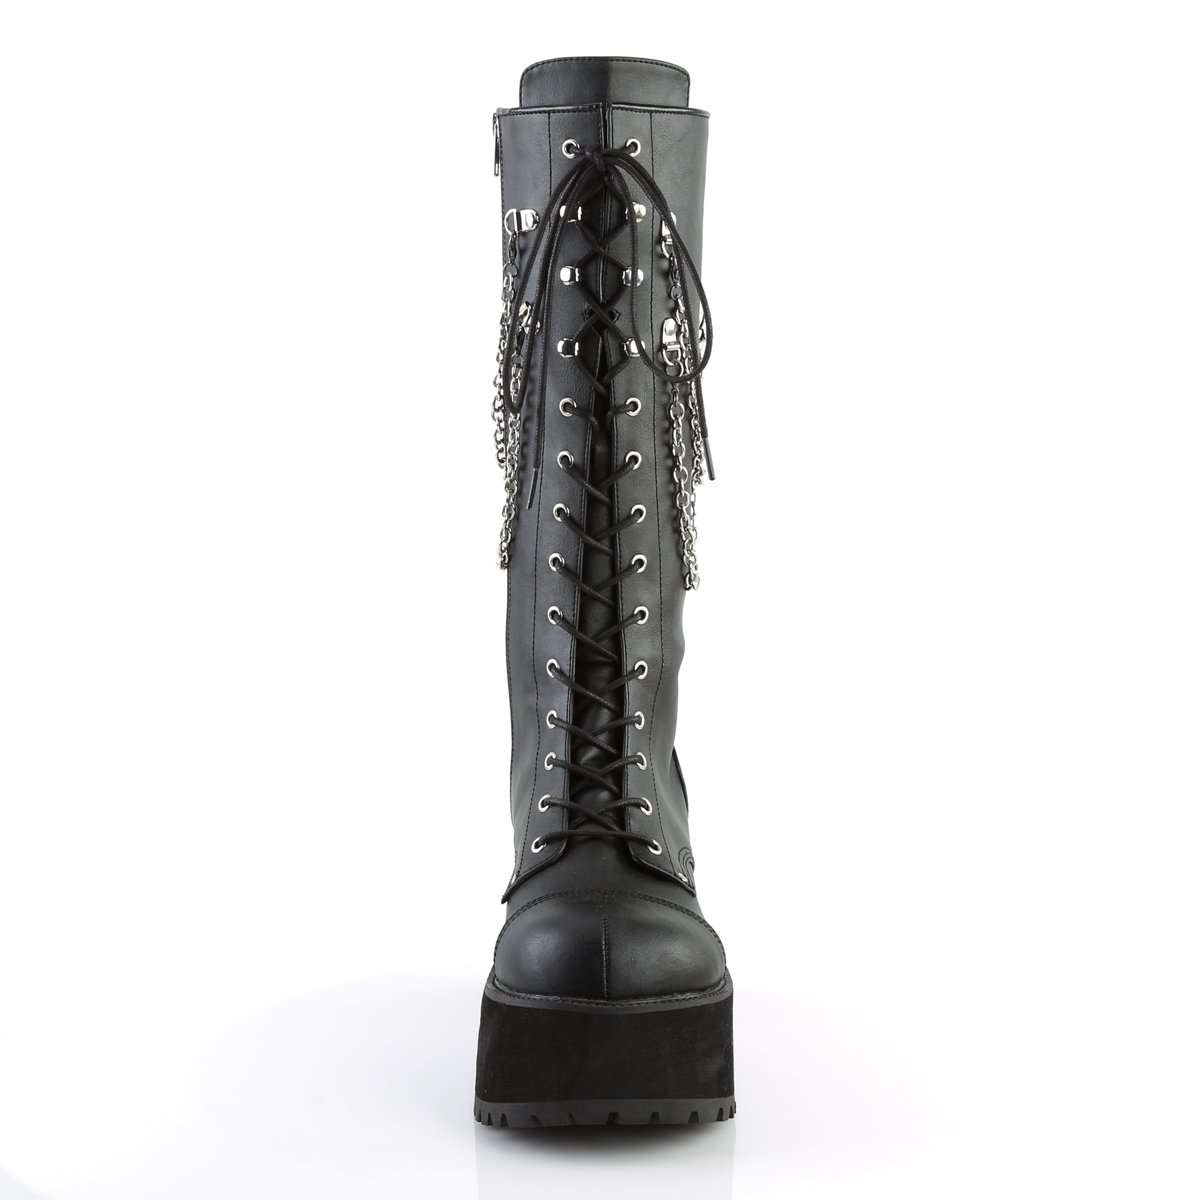 Demonia Platform Boots - Ranger 303 Lace-up Platform Boot with Chains